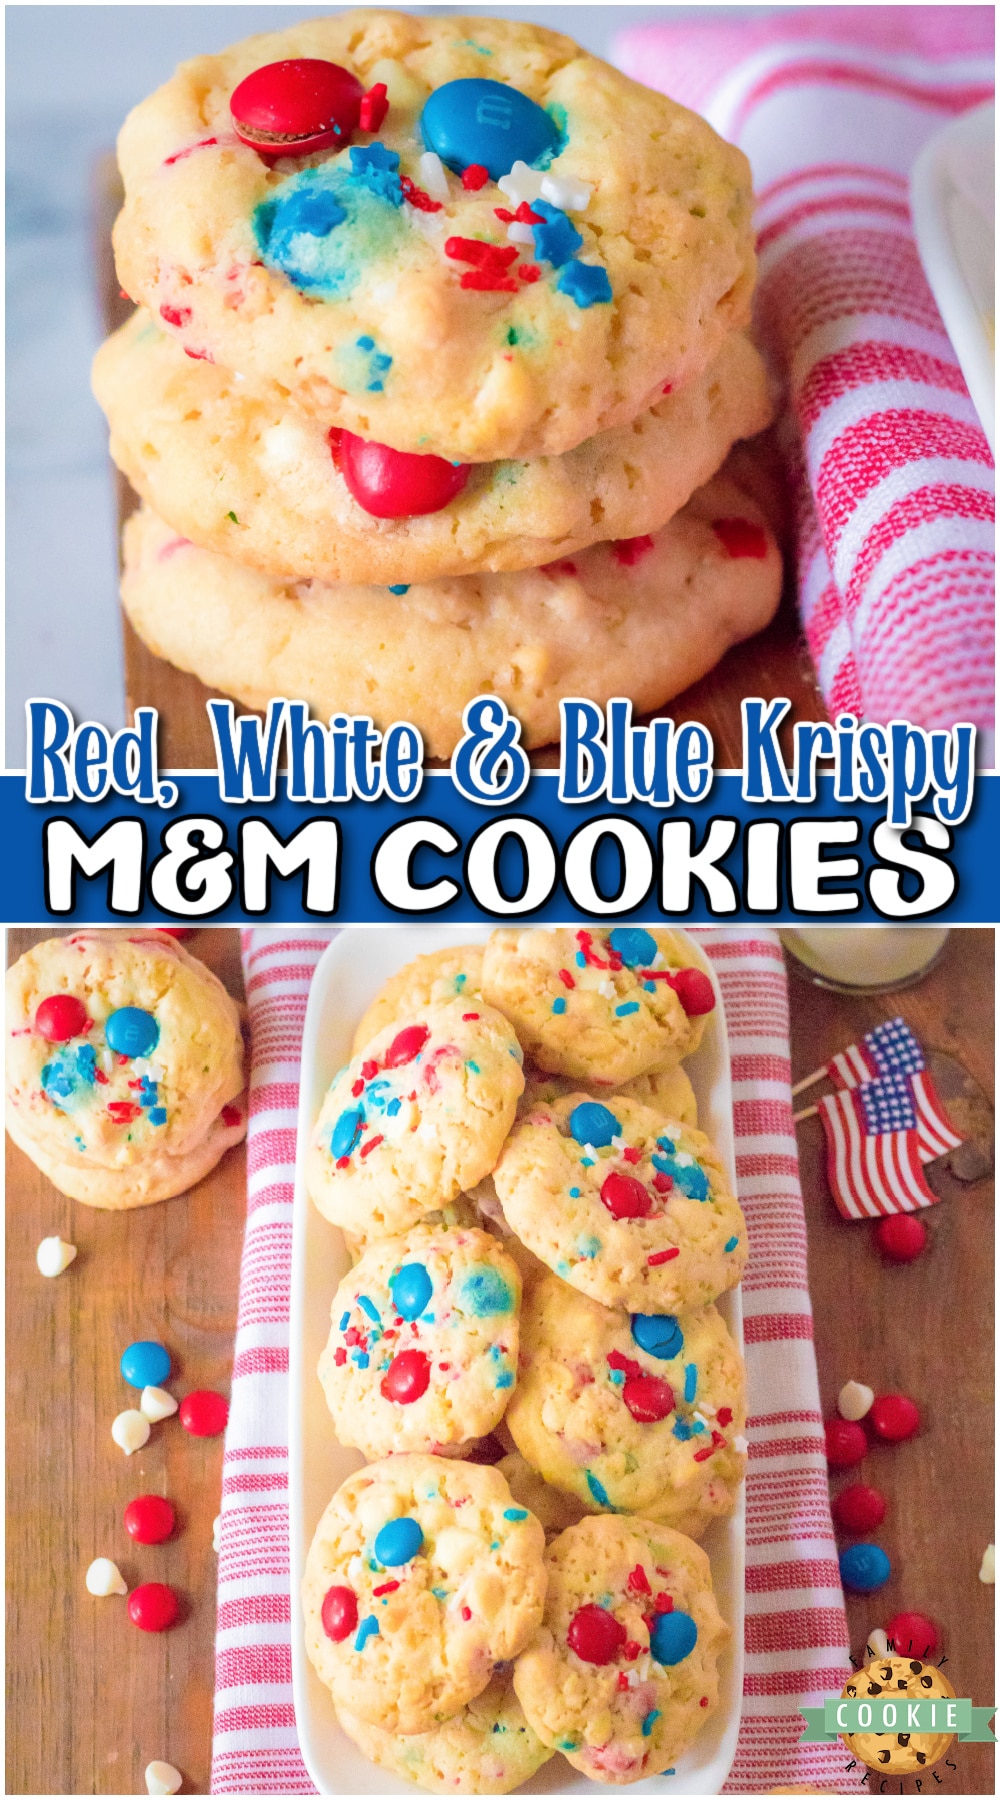 Krispy M&M 4th of July Cookies are soft & chewy, made with M&M's, white chocolate & Rice Krispies! These patriotic cookies are a festive red, white & blue treat for the holiday dessert table.  via @buttergirls